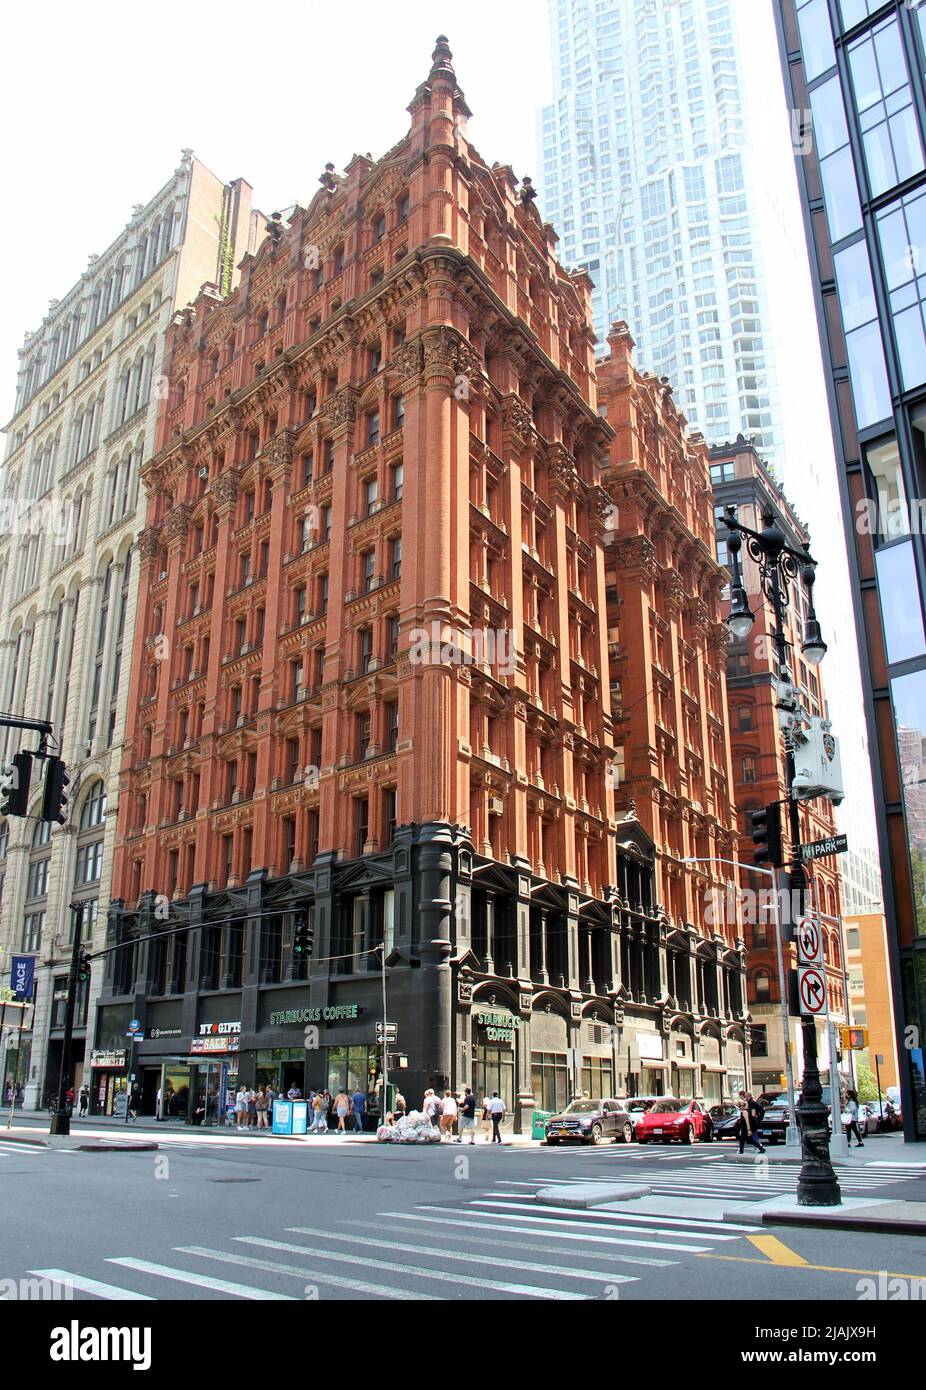 Potter Building, combination of the Queen Anne and Neo-Grec styles, erected between 1883 and 1886, in Lower Manhattan, New York, NY, USA Stock Photo